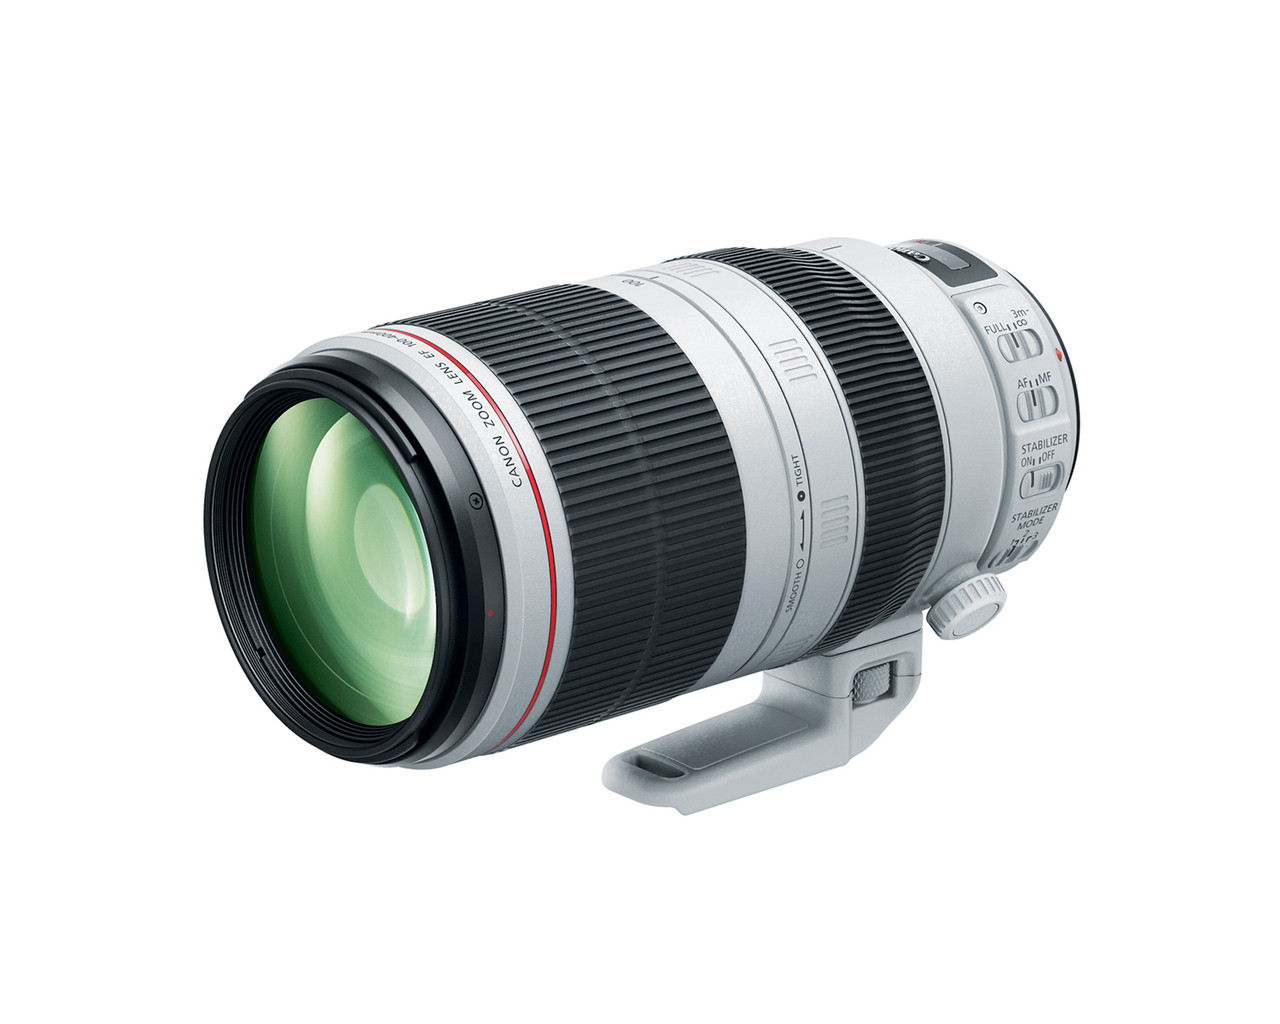 Canon EF 100-400mm f/4.5-5.6L IS II USM (Image Stabilized) Zoom 